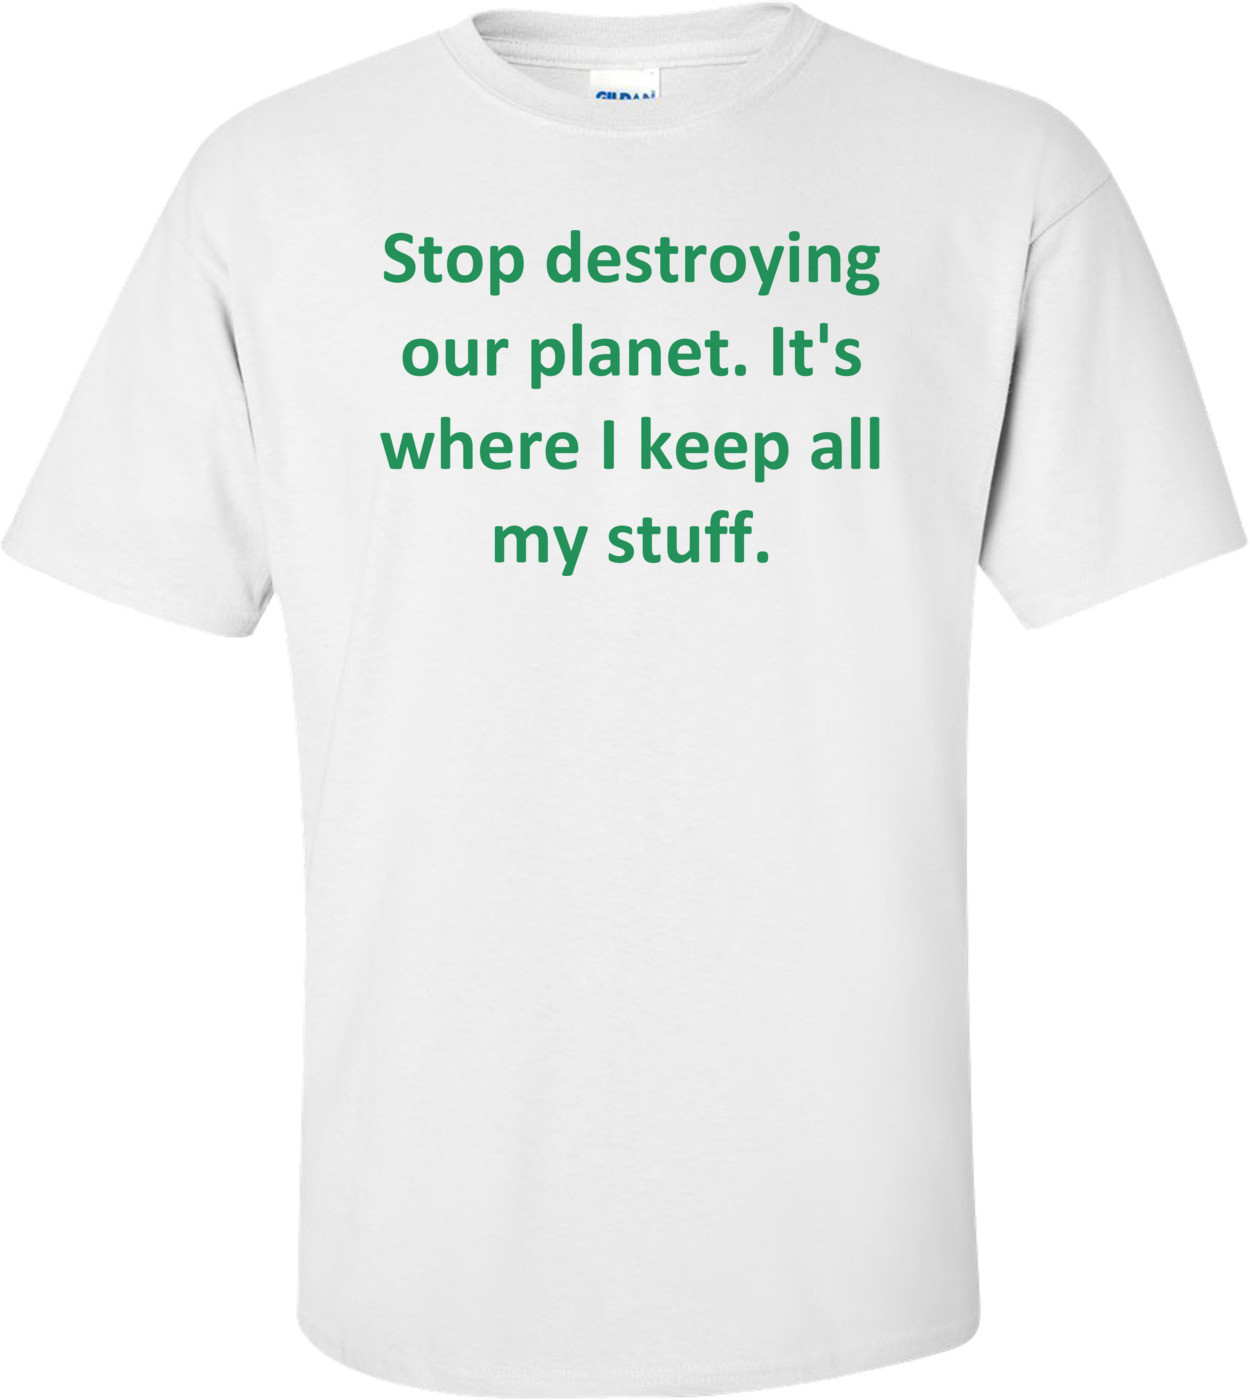 Stop destroying our planet. It's where I keep all my stuff. Shirt